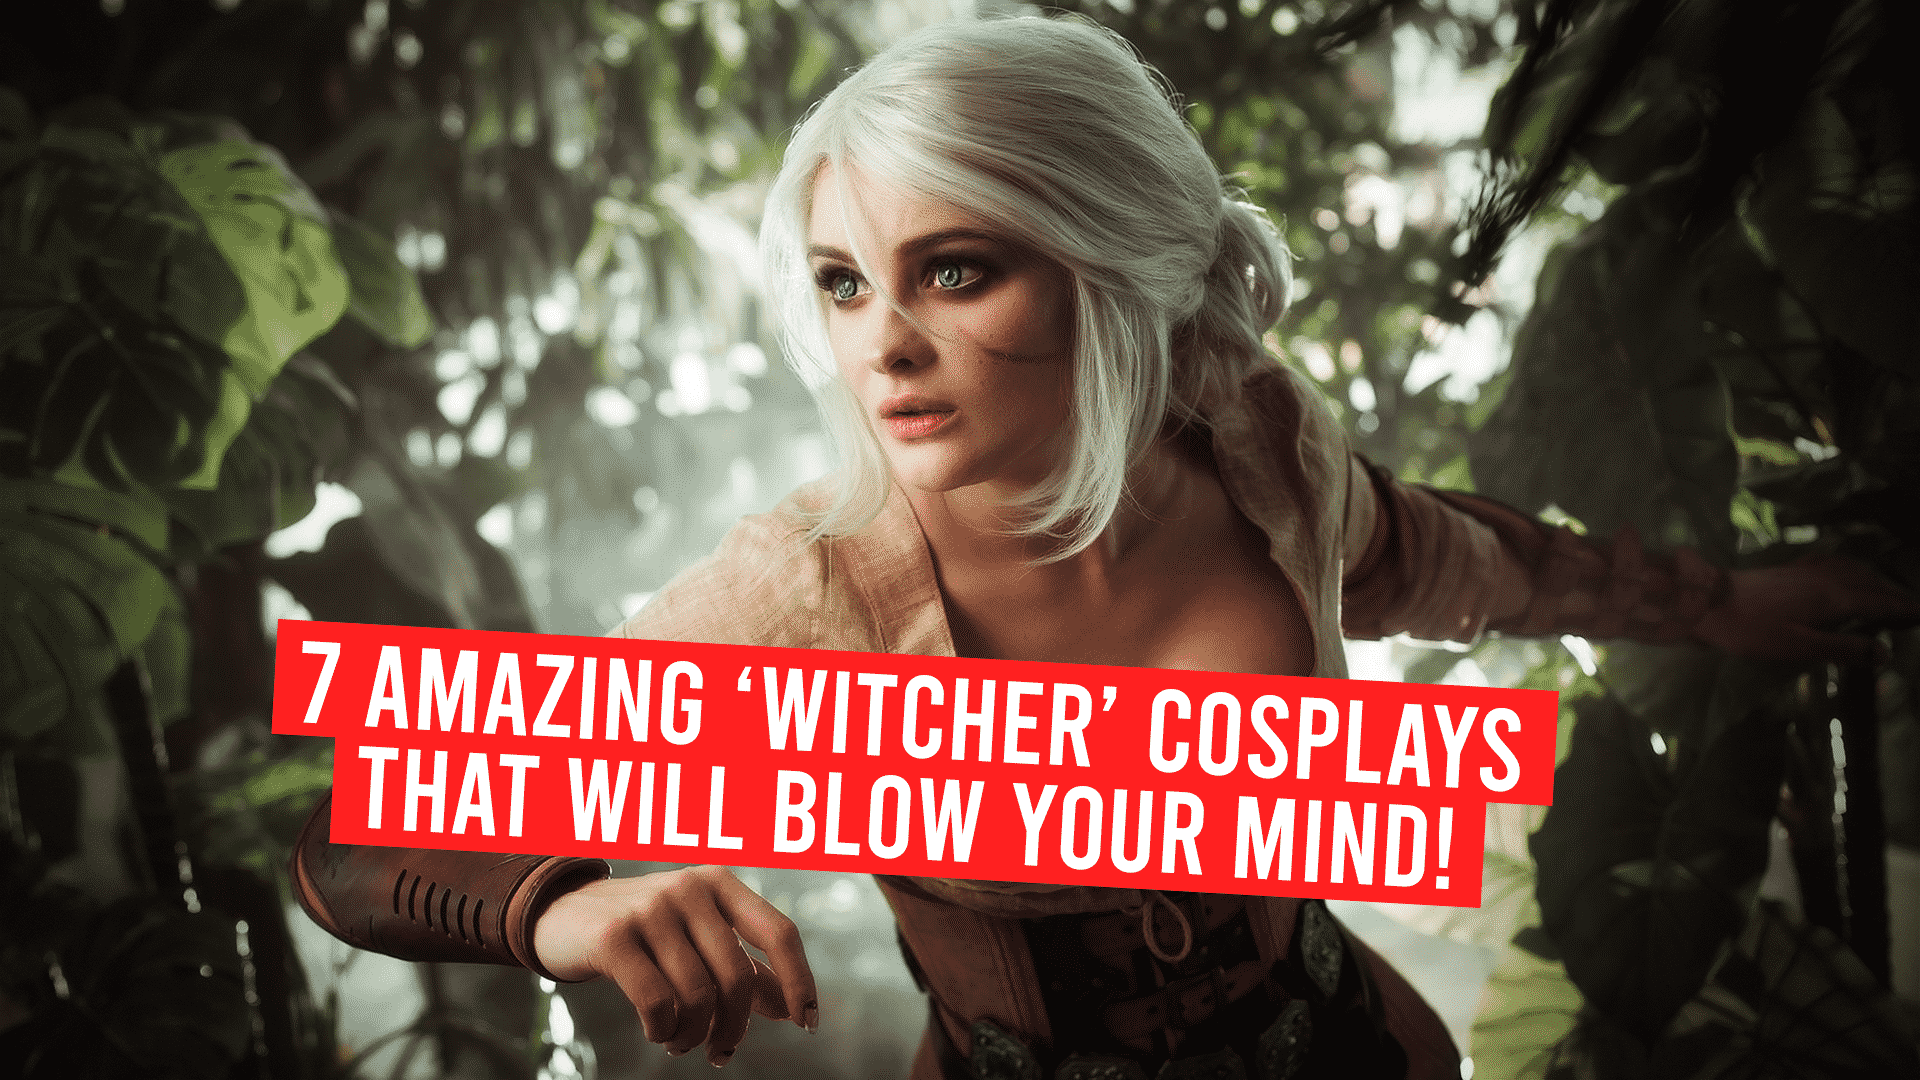 7 Amazing Witcher Cosplays That Will Blow Your Mind.